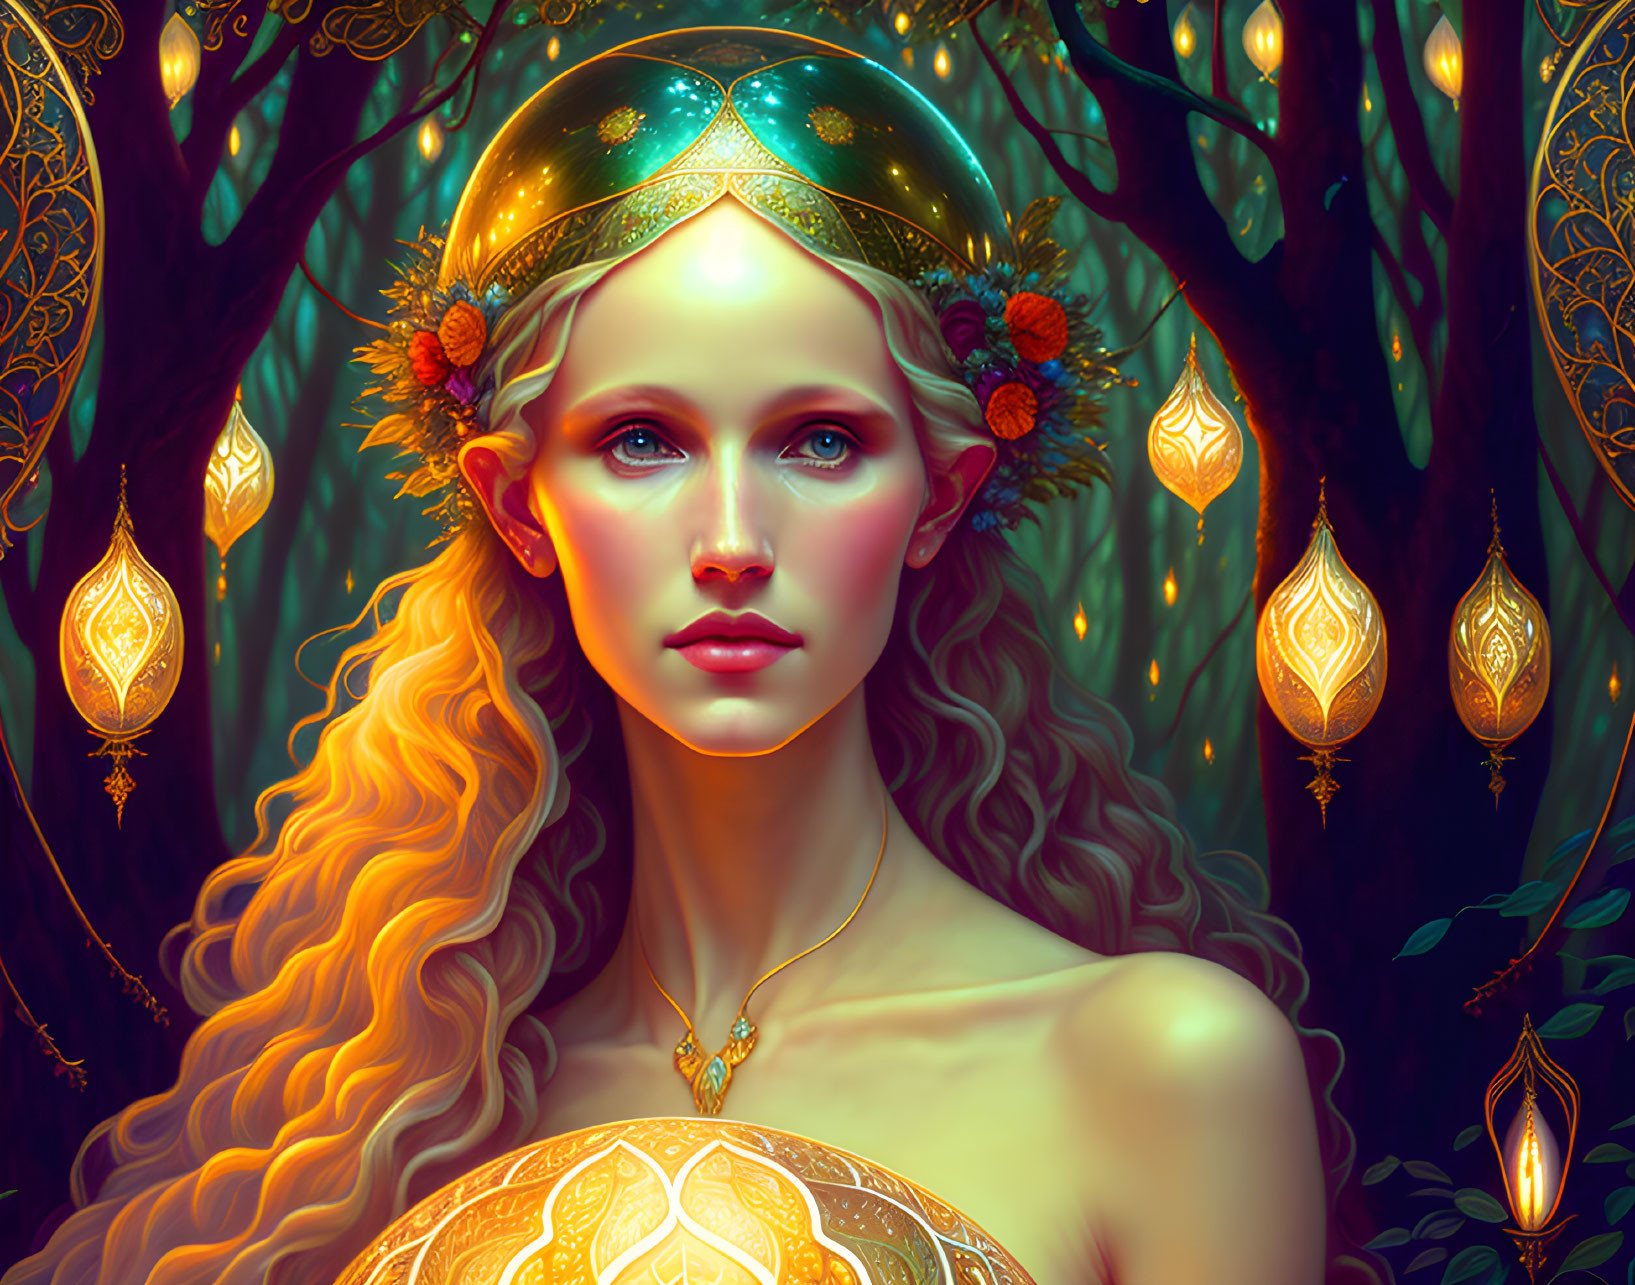 Ethereal woman with golden circlet in enchanted forest surrounded by autumn leaves and glowing lanterns